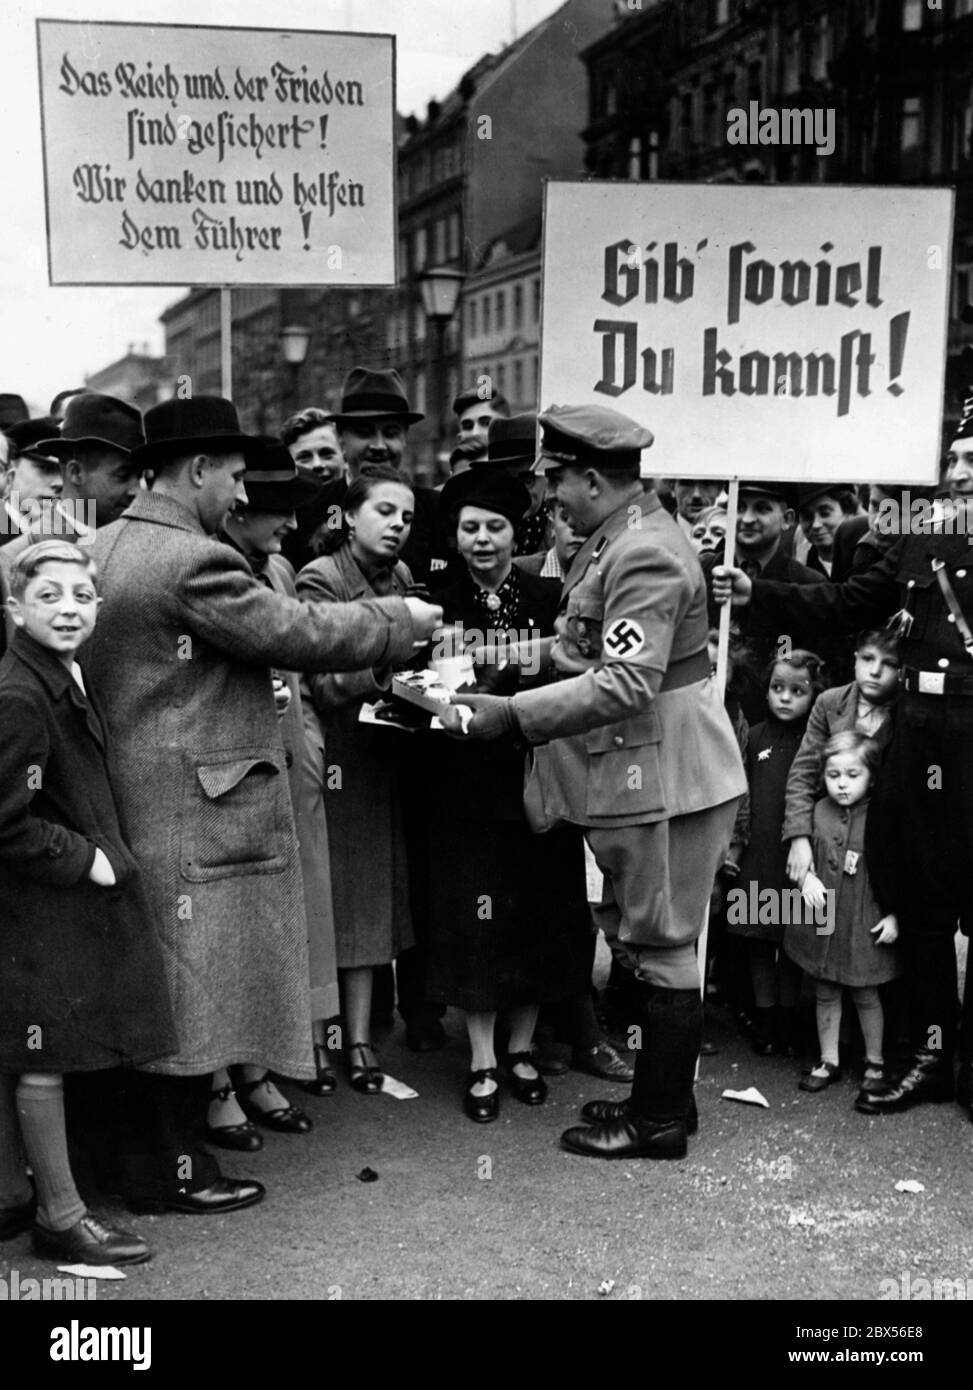 During a street assembly of the Winterhilfswerk des Deutschen Volkes (Winter Relief of the German People), organized by the German Labor Front, peace slogans are held up after the Munich conference (The Reich and Peace are secured! We thank and help the Fuehrer). During the fundraising 'Fuehrerbuechlein' are sold for 'As much as you can afford' (poster). Stock Photo